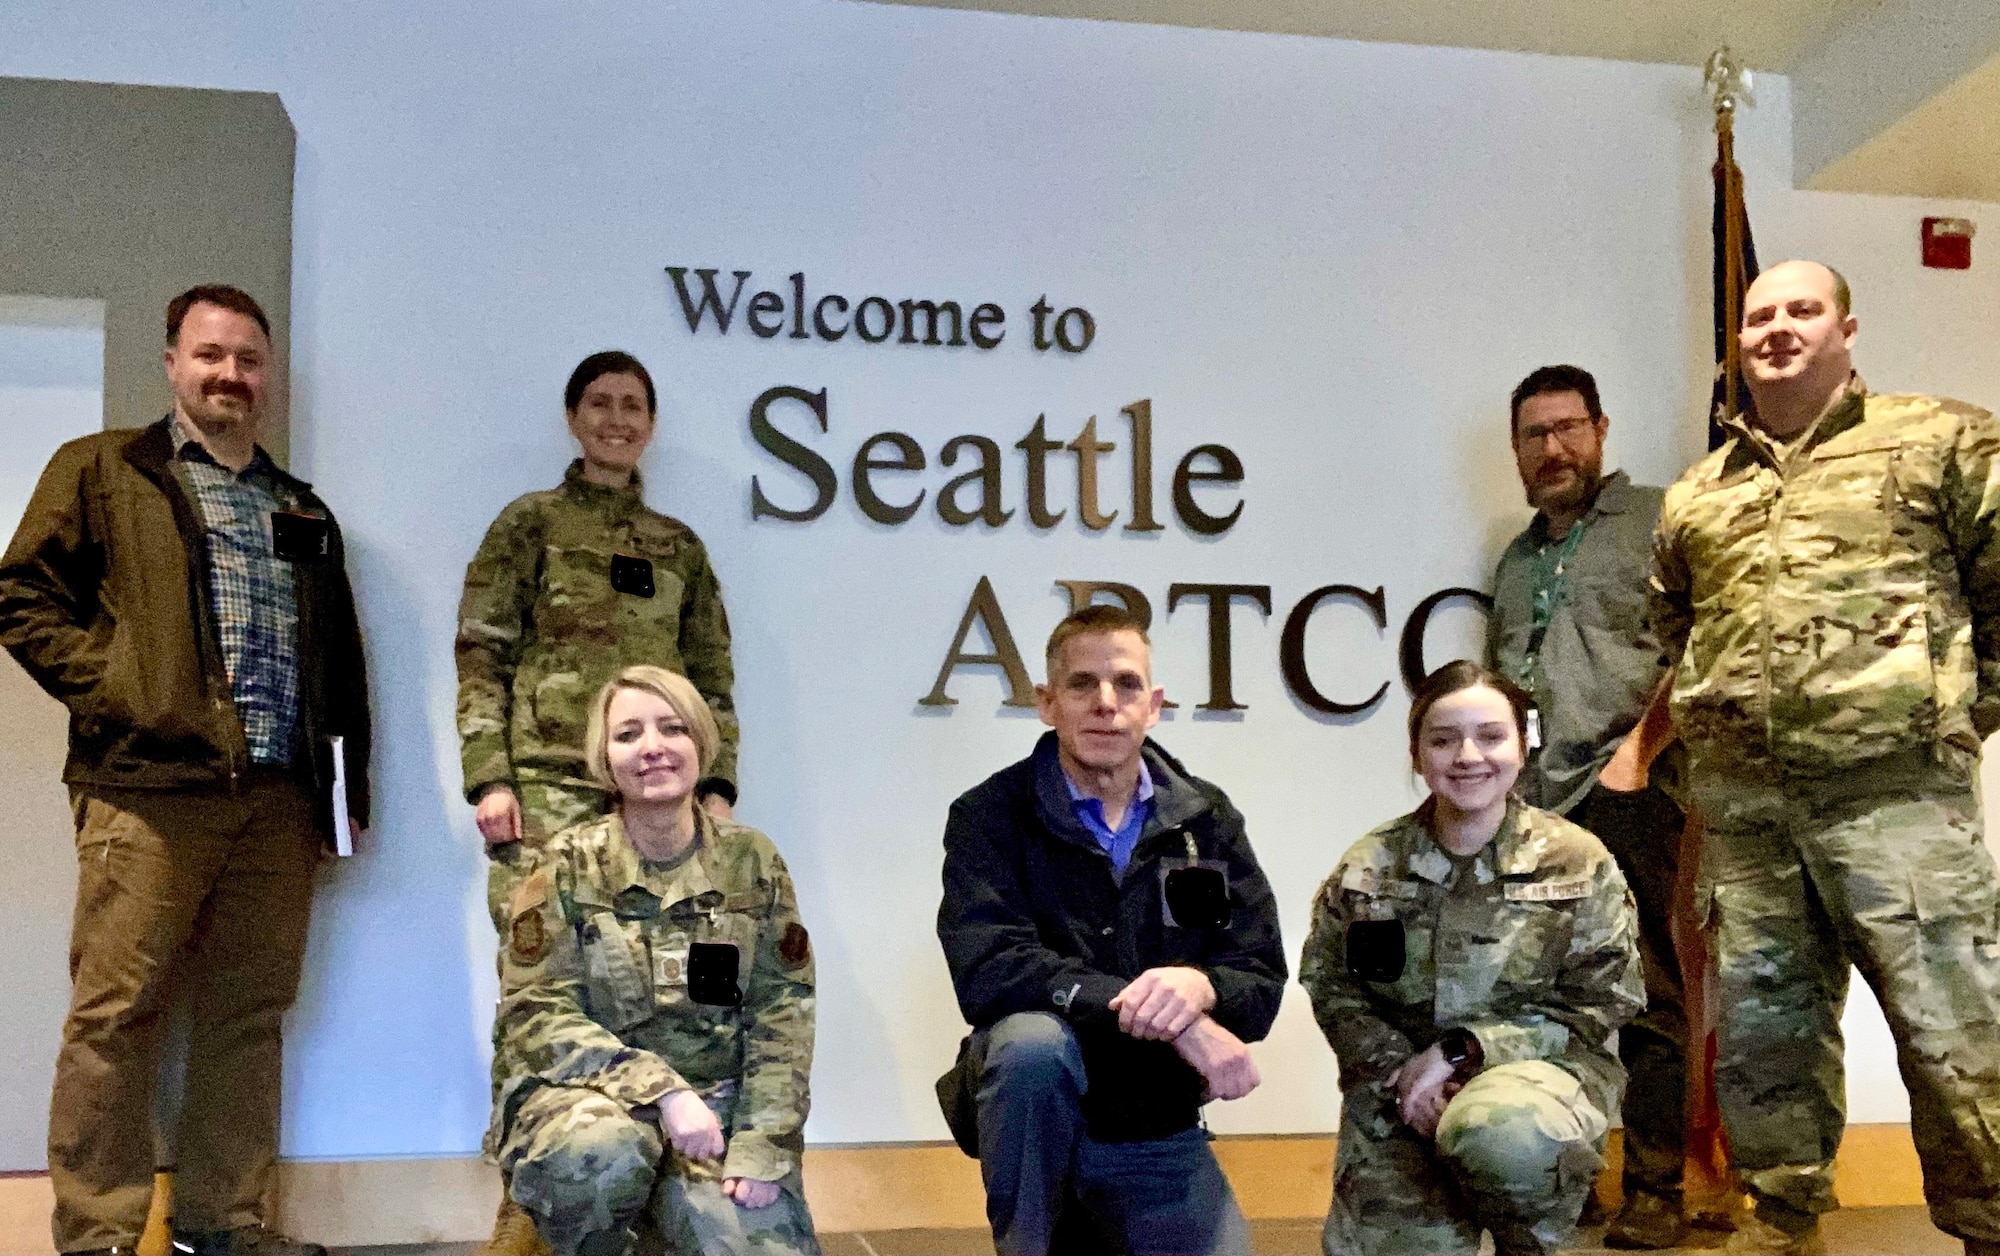 group picture in front of Seattle ARTCC sign